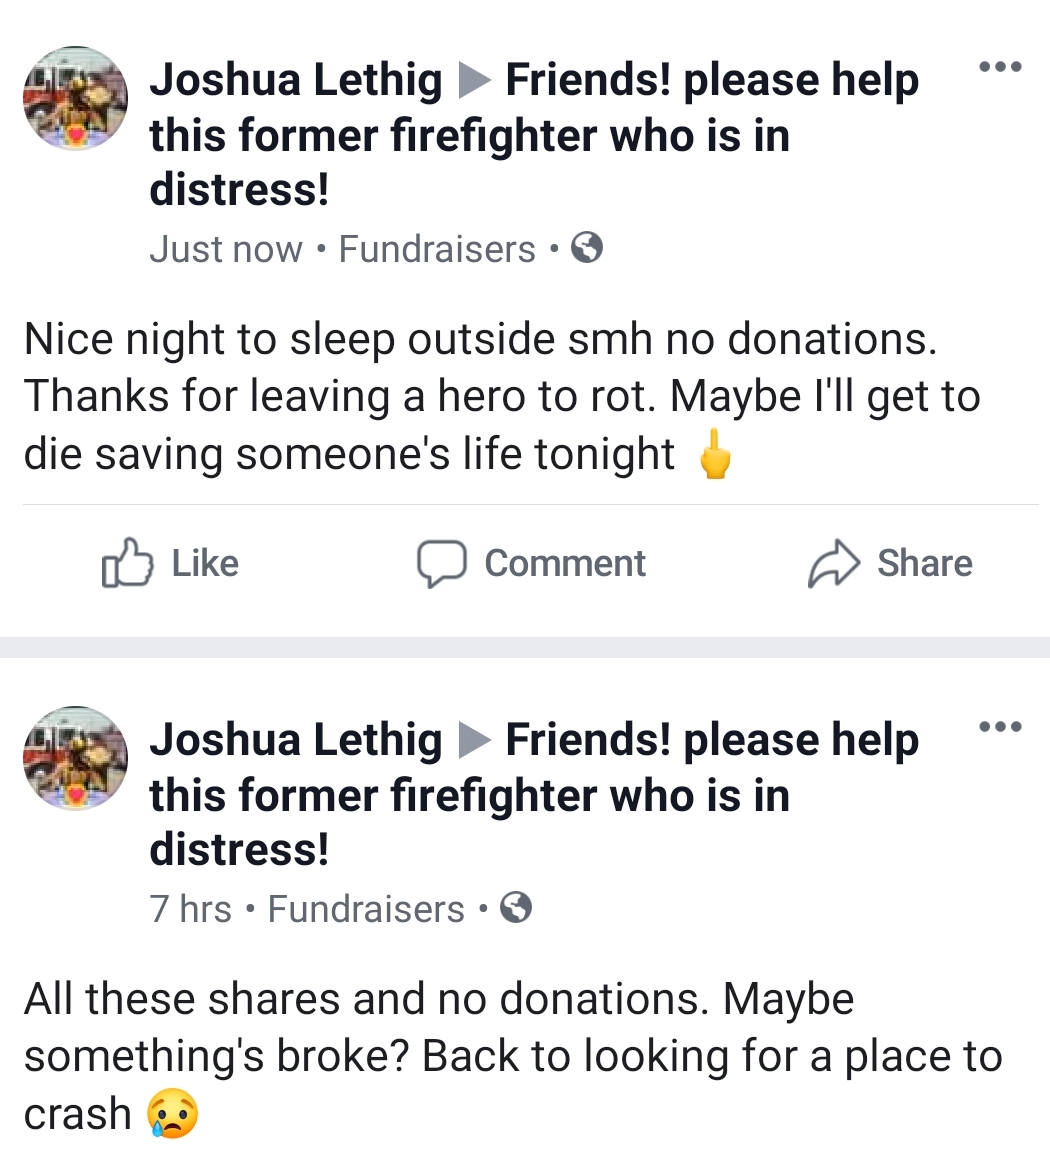 taxstone twitter beef - Joshua Lethig Friends! please help this former firefighter who is in distress! Just now Fundraisers Nice night to sleep outside smh no donations. Thanks for leaving a hero to rot. Maybe I'll get to die saving someone's life tonight